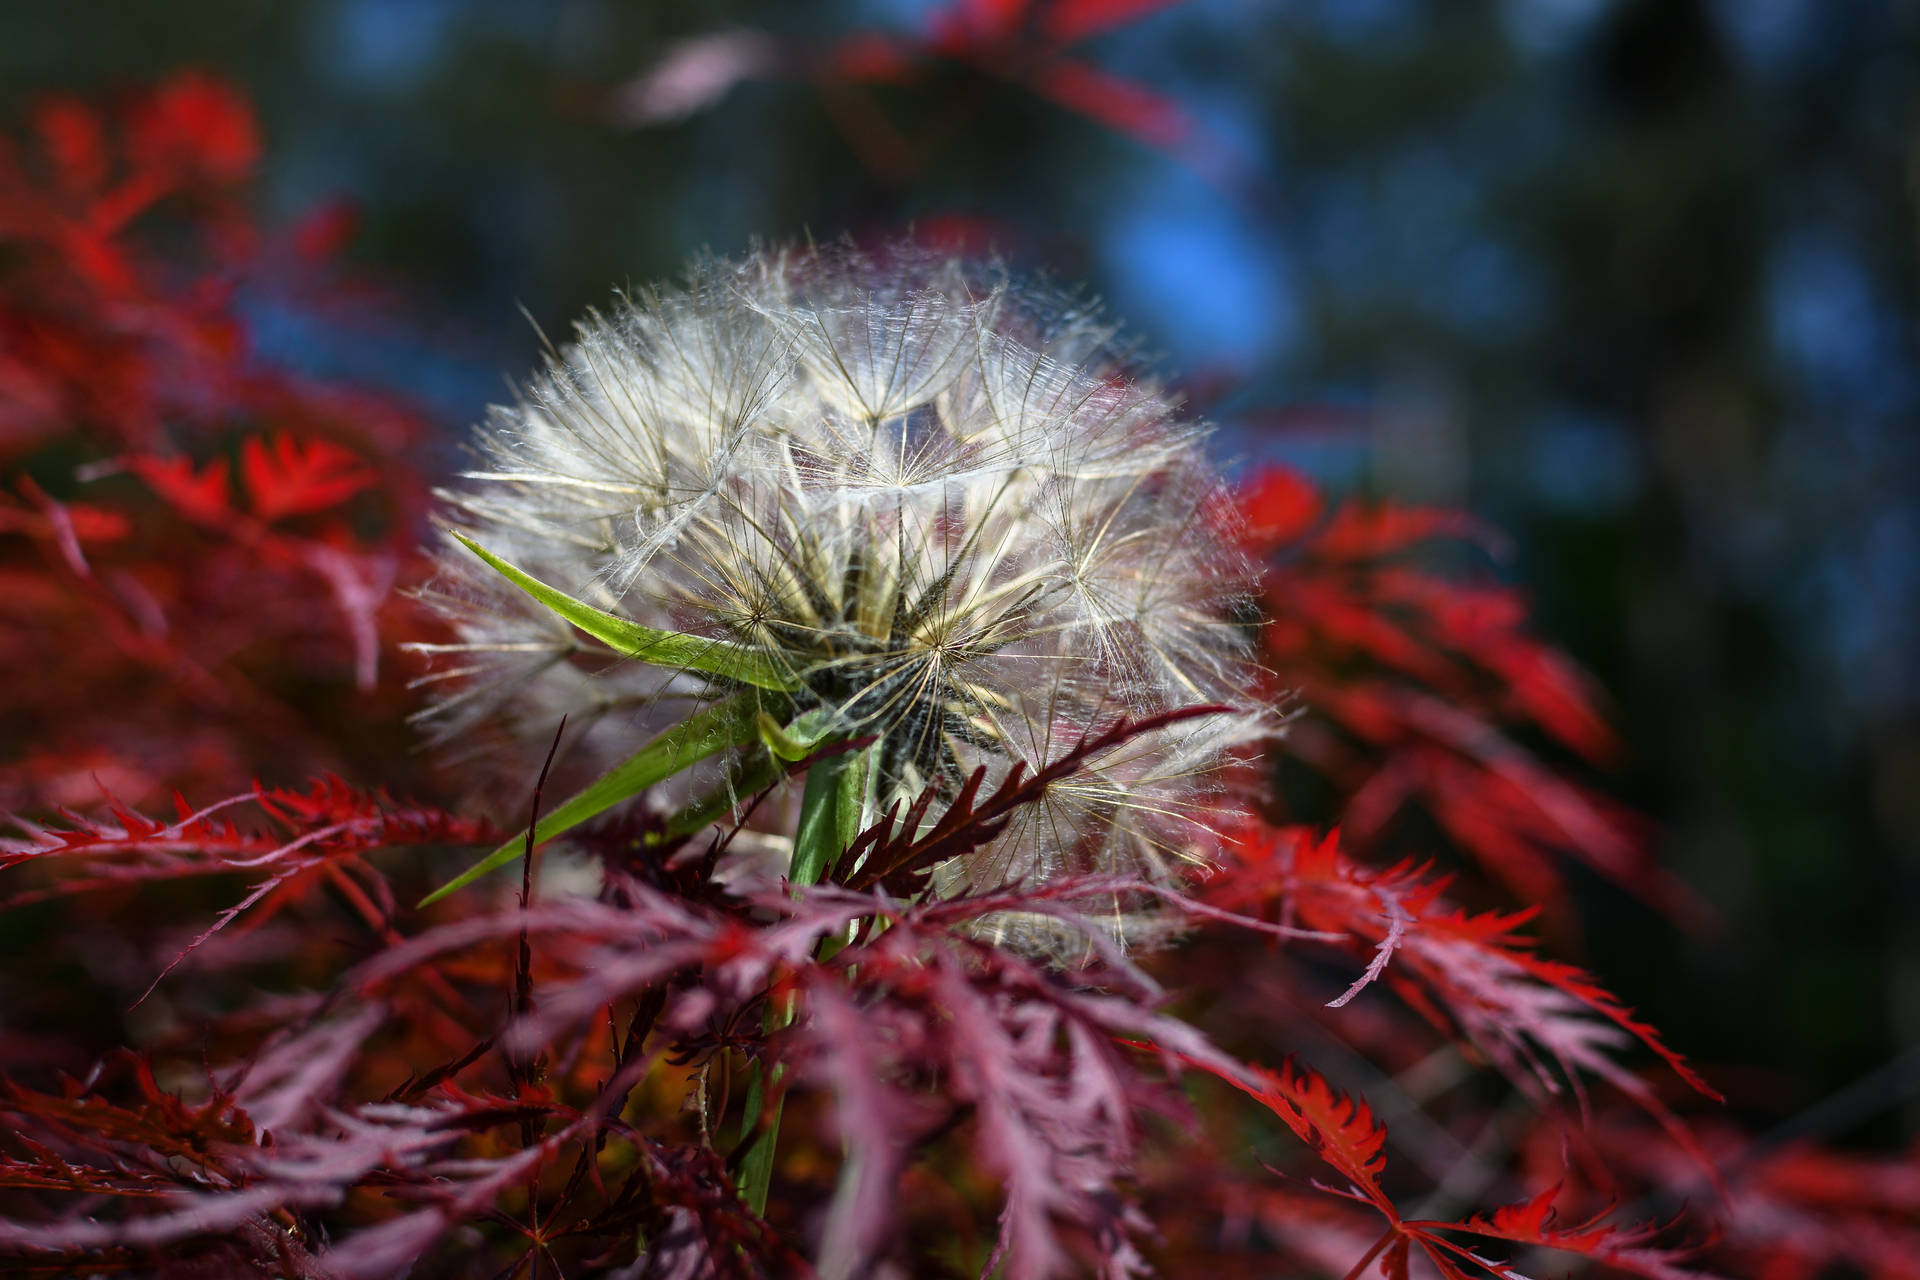 A purple Japanese Maple tree with a dandelion in the foreground Wallpaper